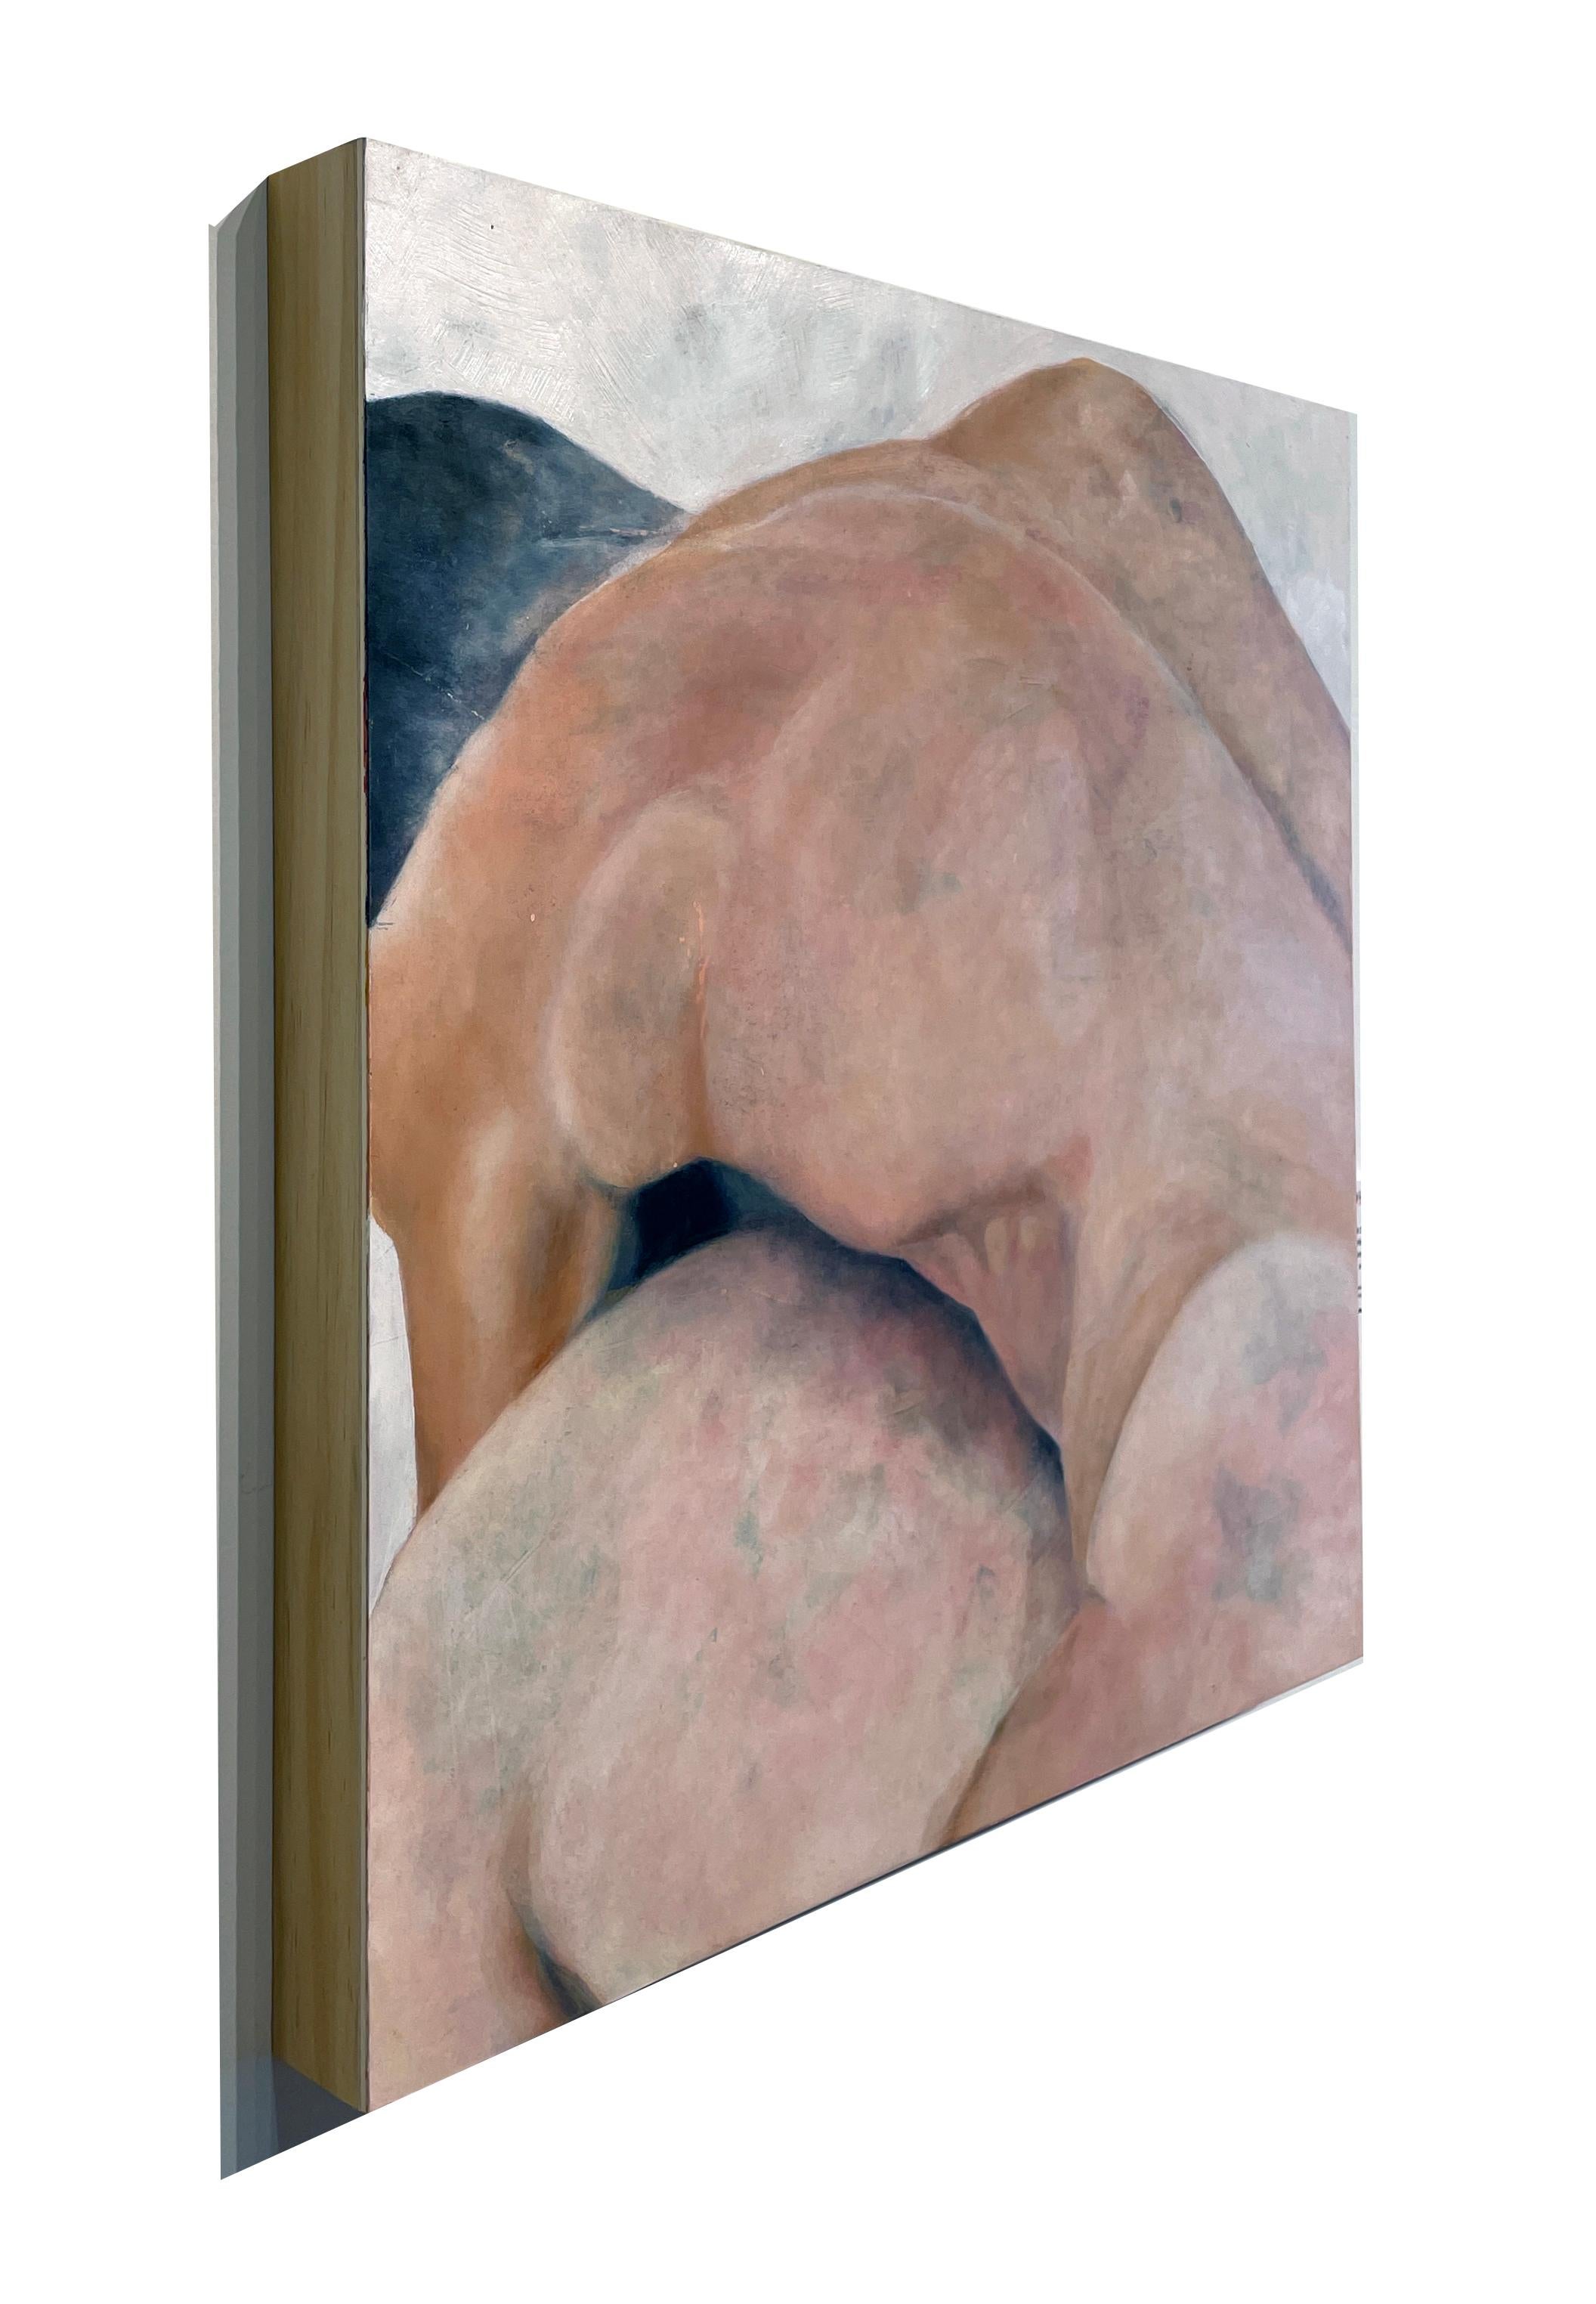 Shield Me - Nude Figures, Intimate Portrayal of a Couple, Original Oil on Panel - Contemporary Painting by Rick Sindt